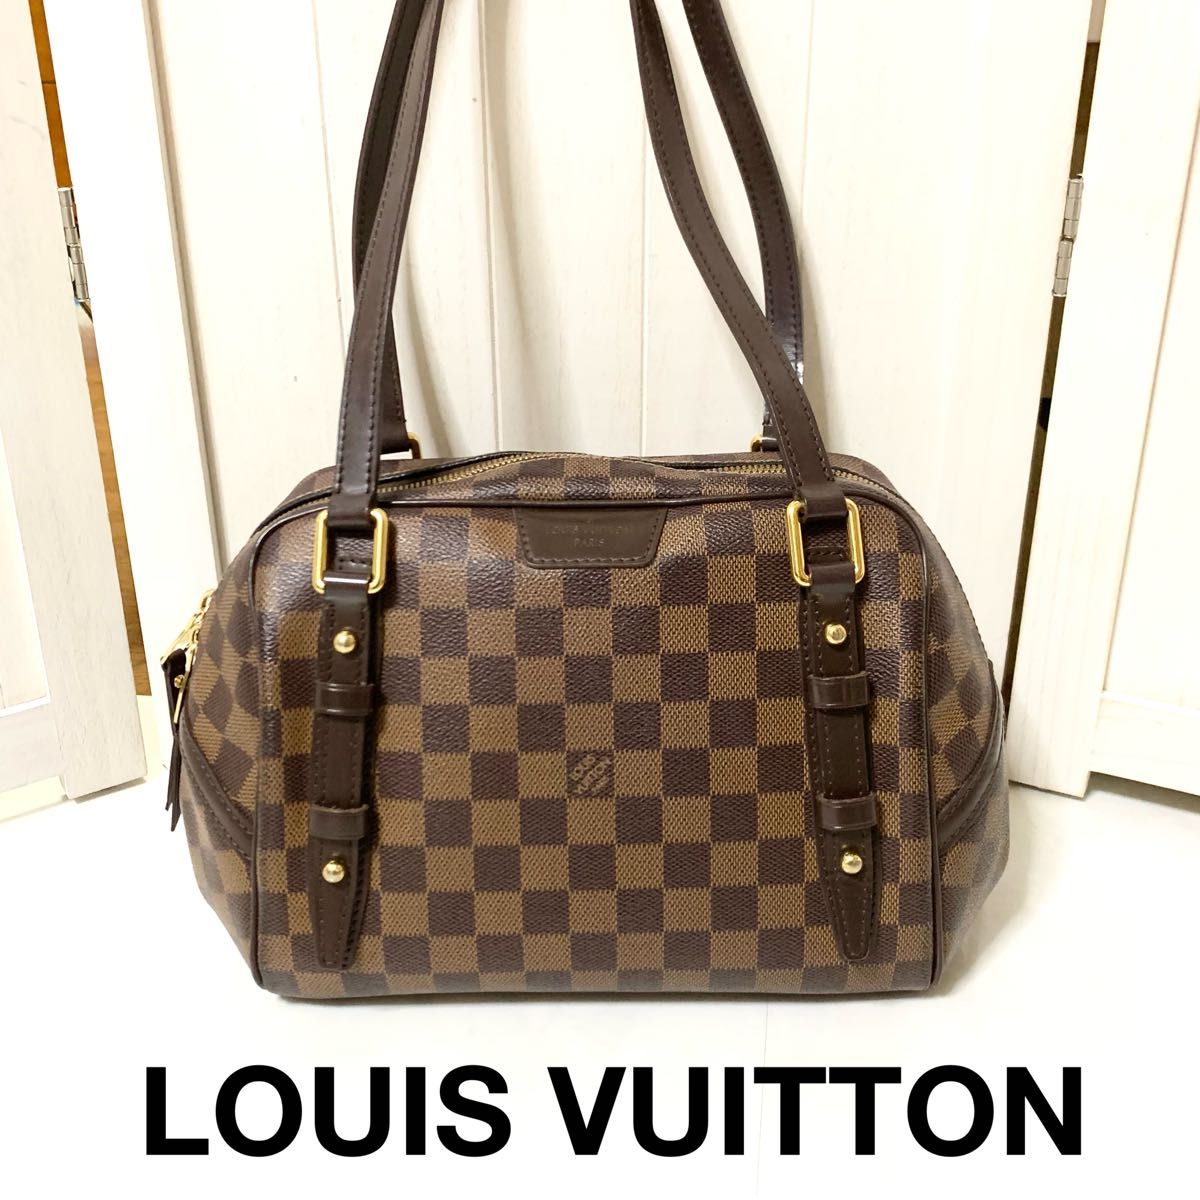 LOUIS VUITTON ルイヴィトン リヴィントンPM | labiela.com